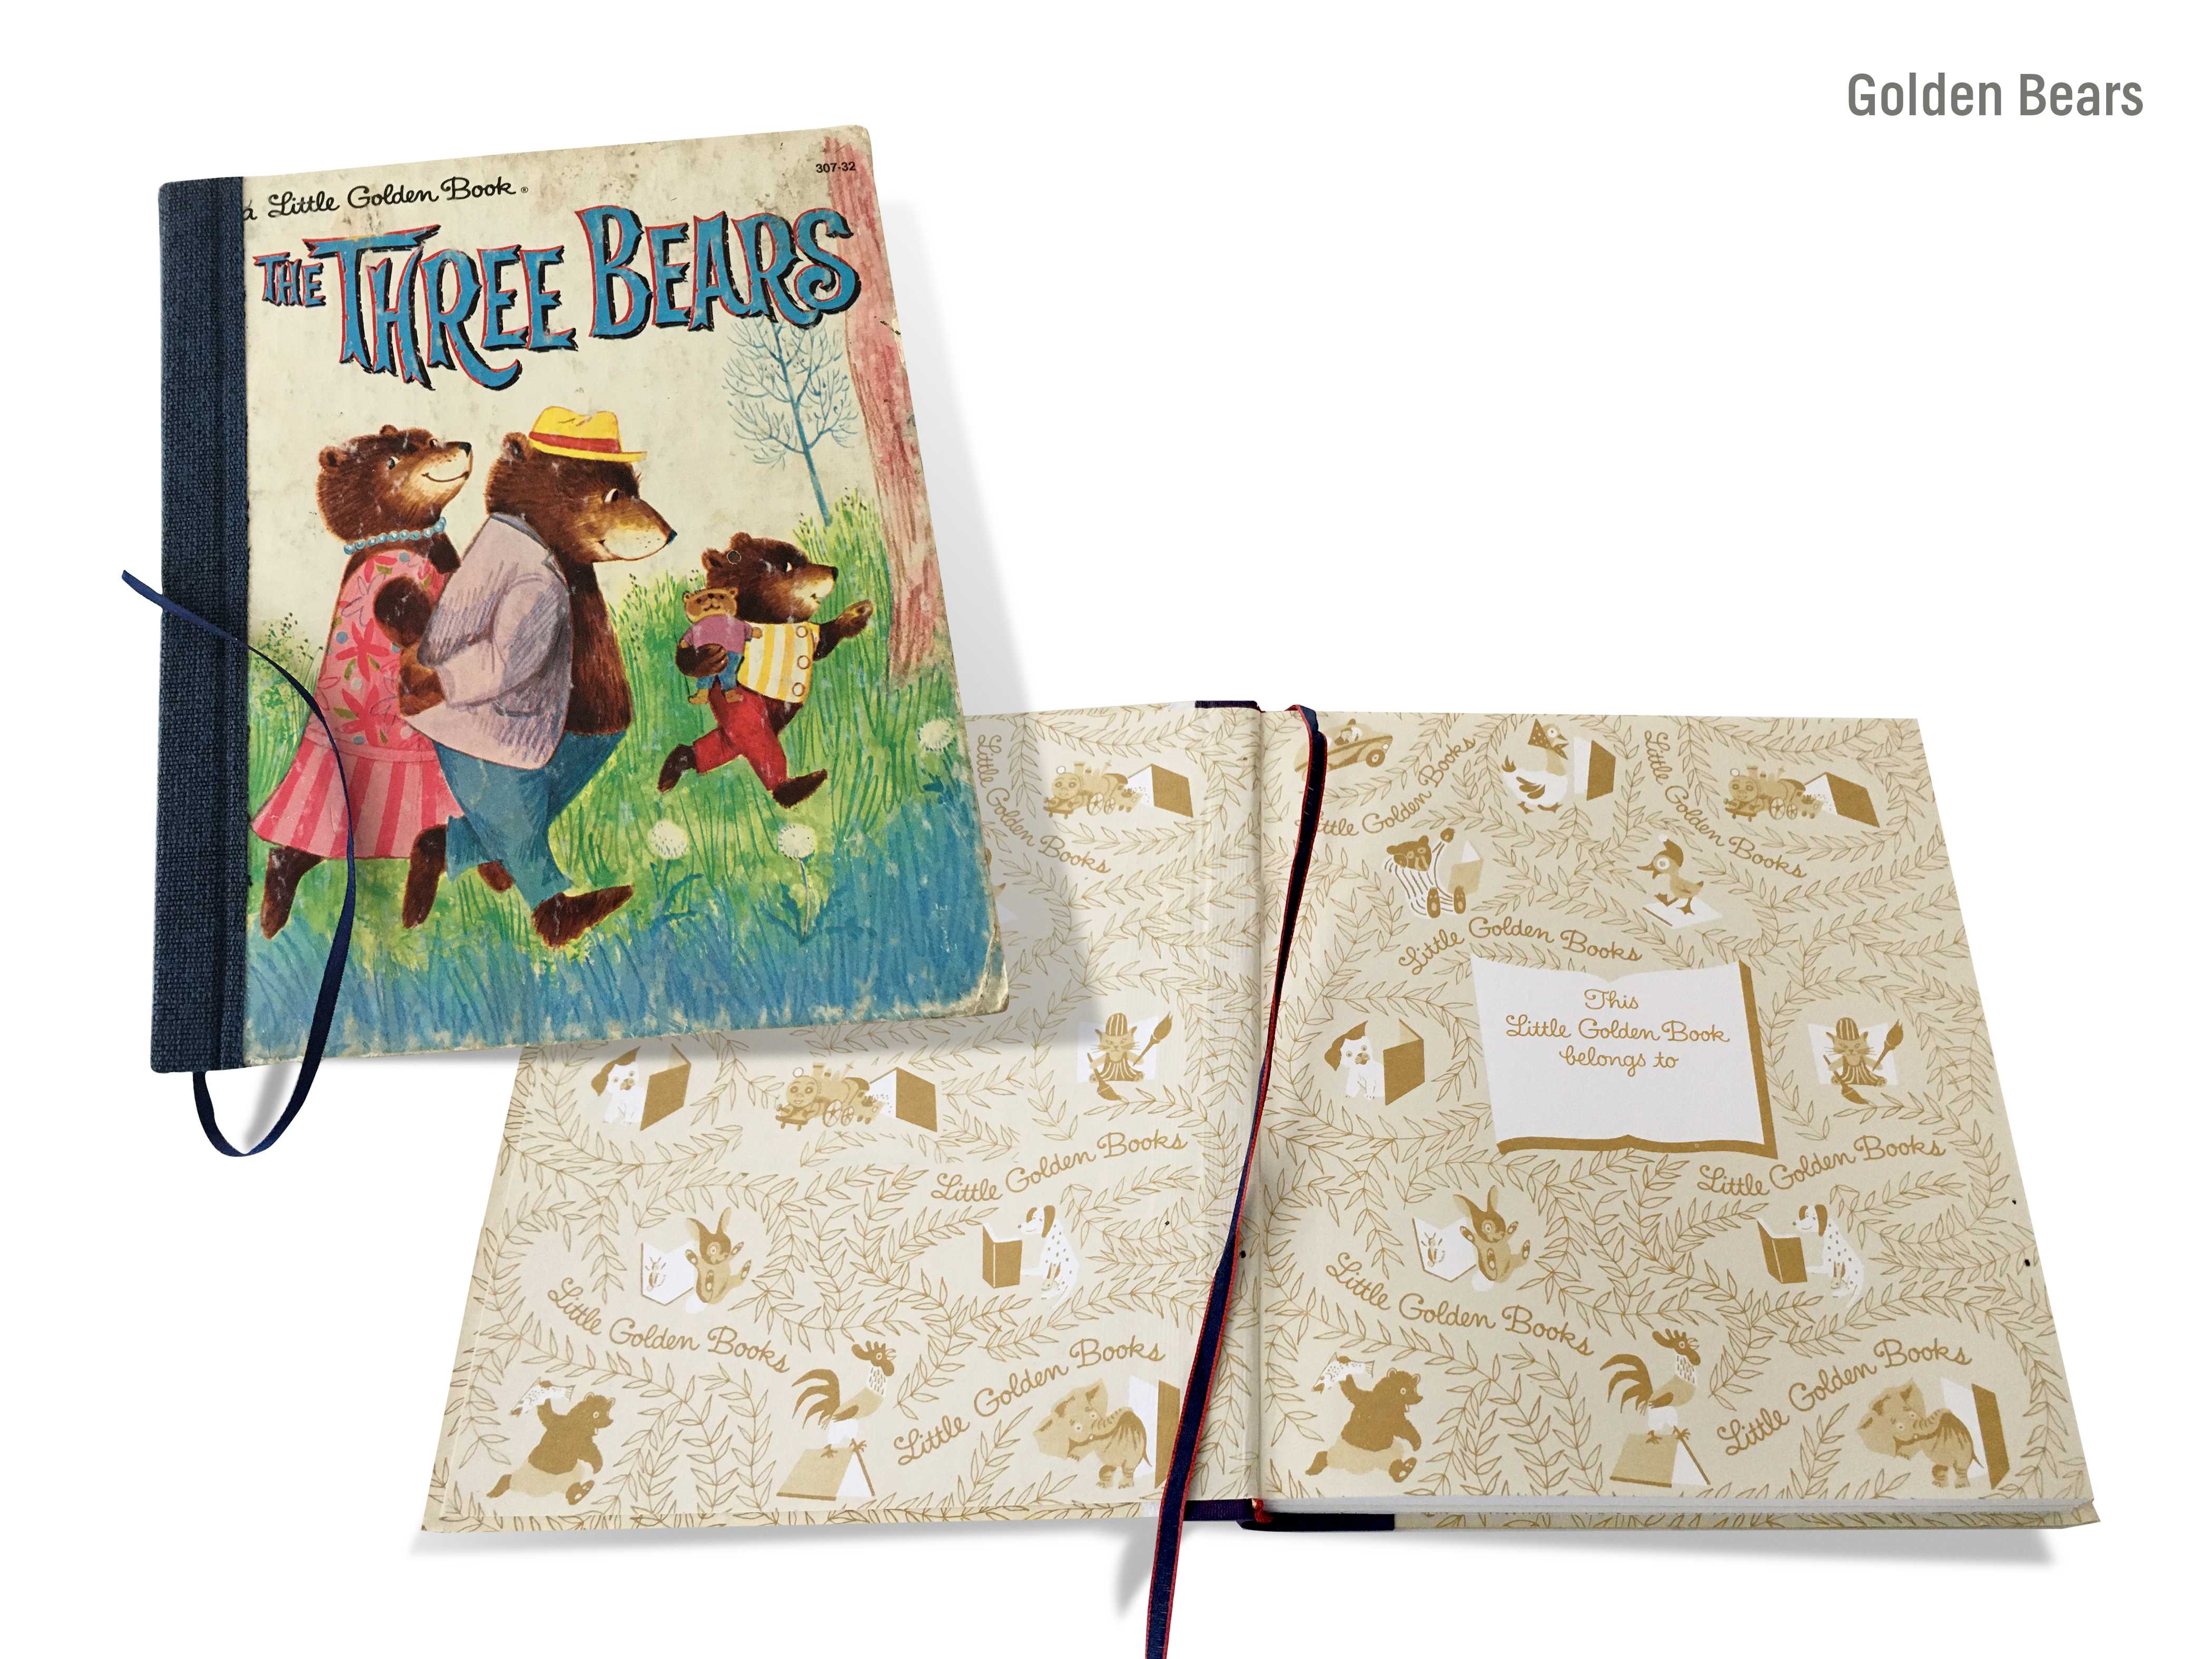 A montage image of a cover and a double-page spread of the hand-made journal titled, ‘Golden Bears’ by Michael Small, featuring a Little Golden Book cover of ‘The Three Bears’ and a double-page spread showing the Little Golden Book endpapers with a panel ‘This Little Golden Book belongs to’.